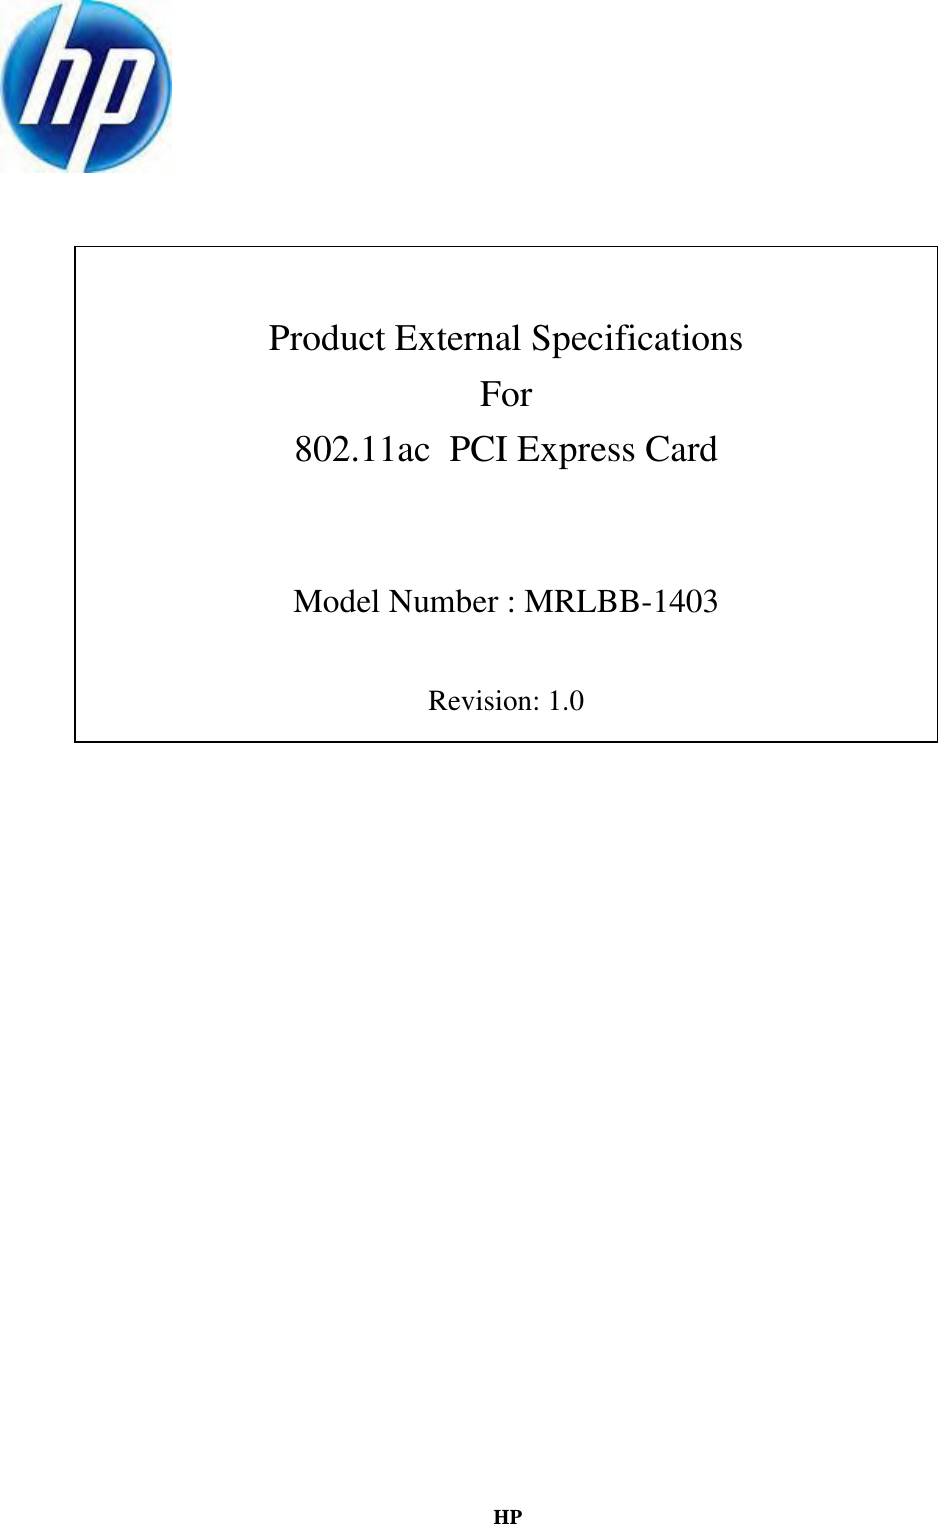 HP      Product External Specifications For 802.11ac  PCI Express Card   Model Number : MRLBB-1403  Revision: 1.0                             